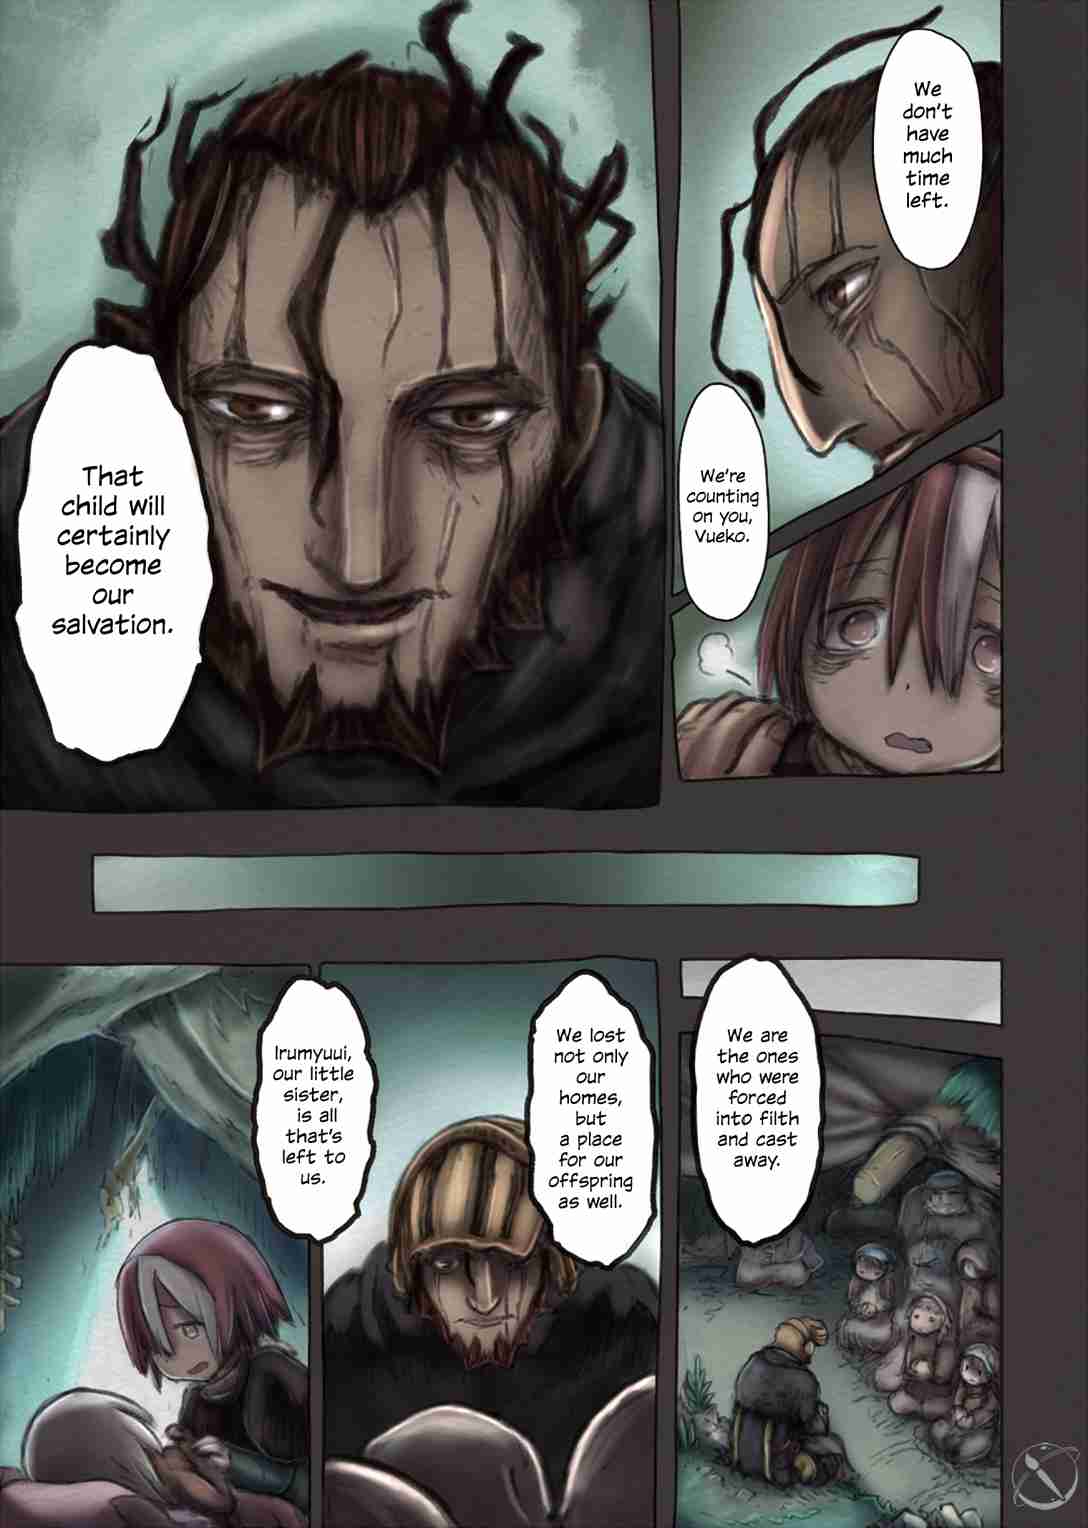 Made in Abyss (fan colored) Vol. 8 Ch. 50 The Cradle of Greed (Colored)